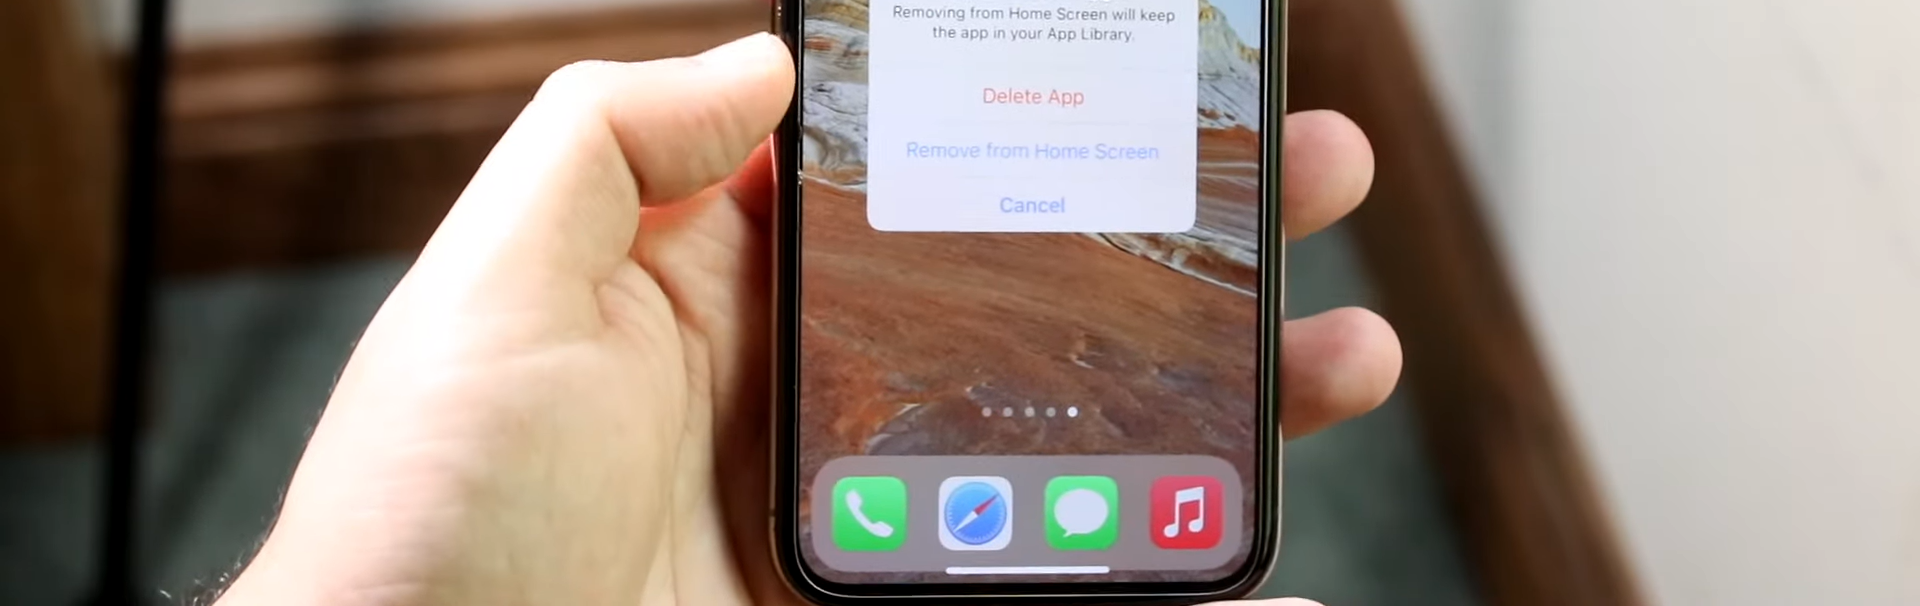 Uninstalling an app from iPhone